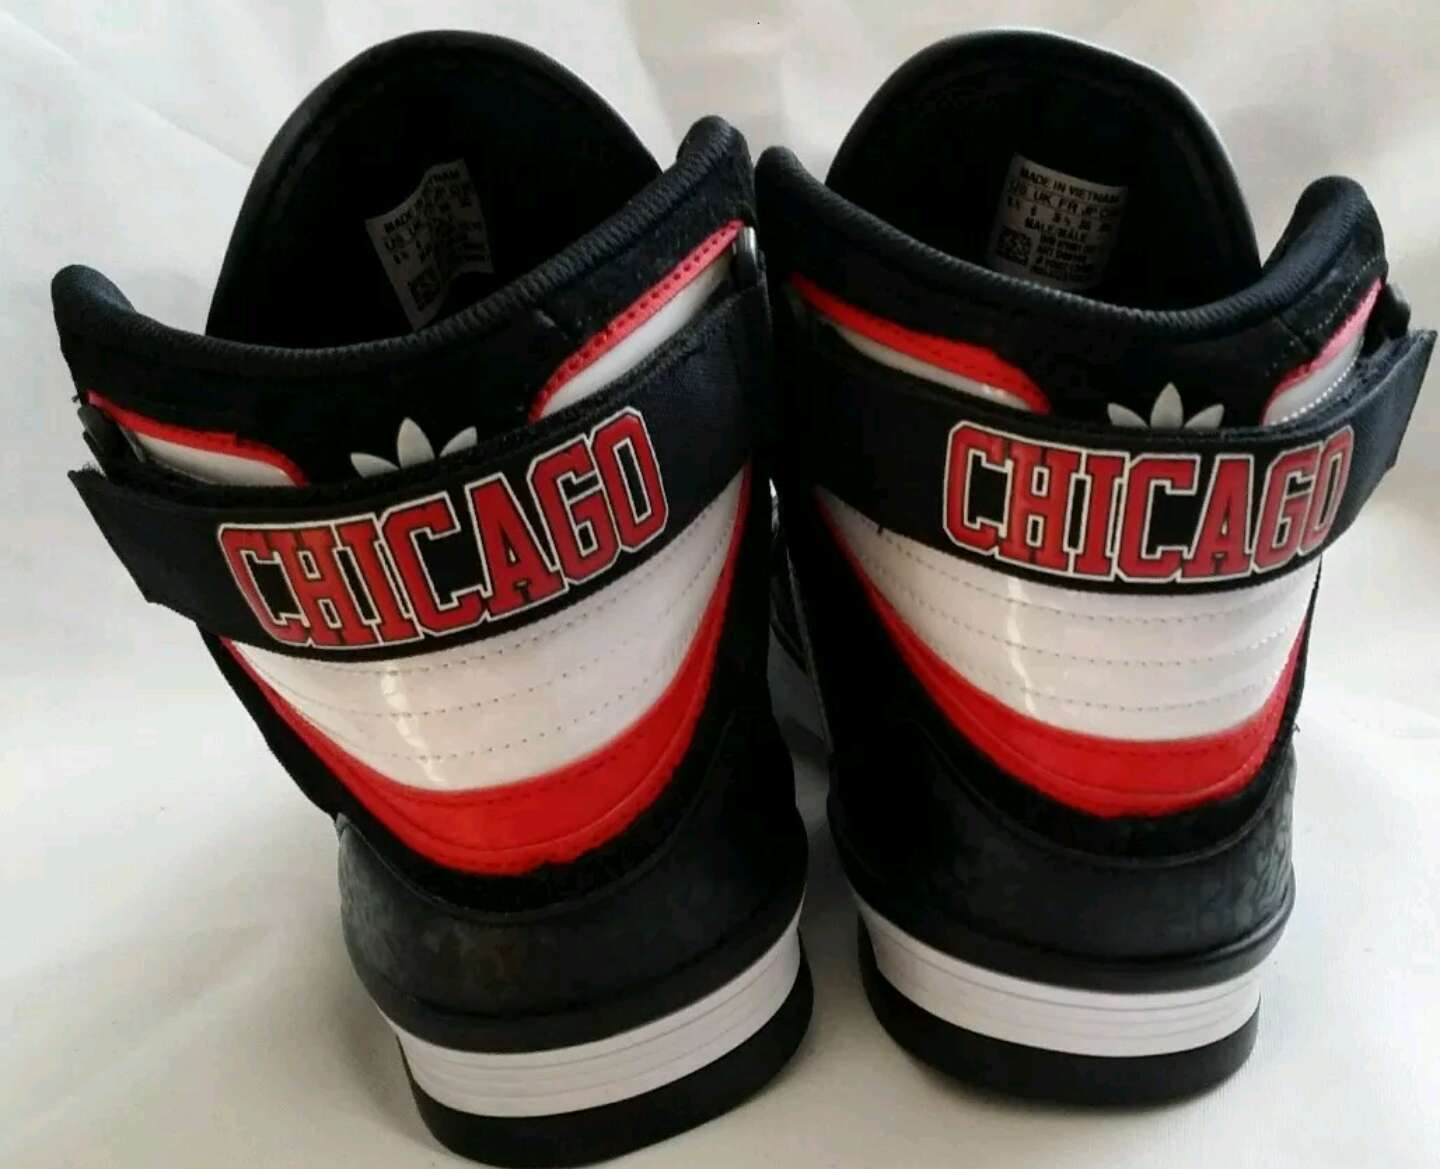 Adidas chicago bulls for sale in Garden Grove, CA - 5miles: Buy and Sell